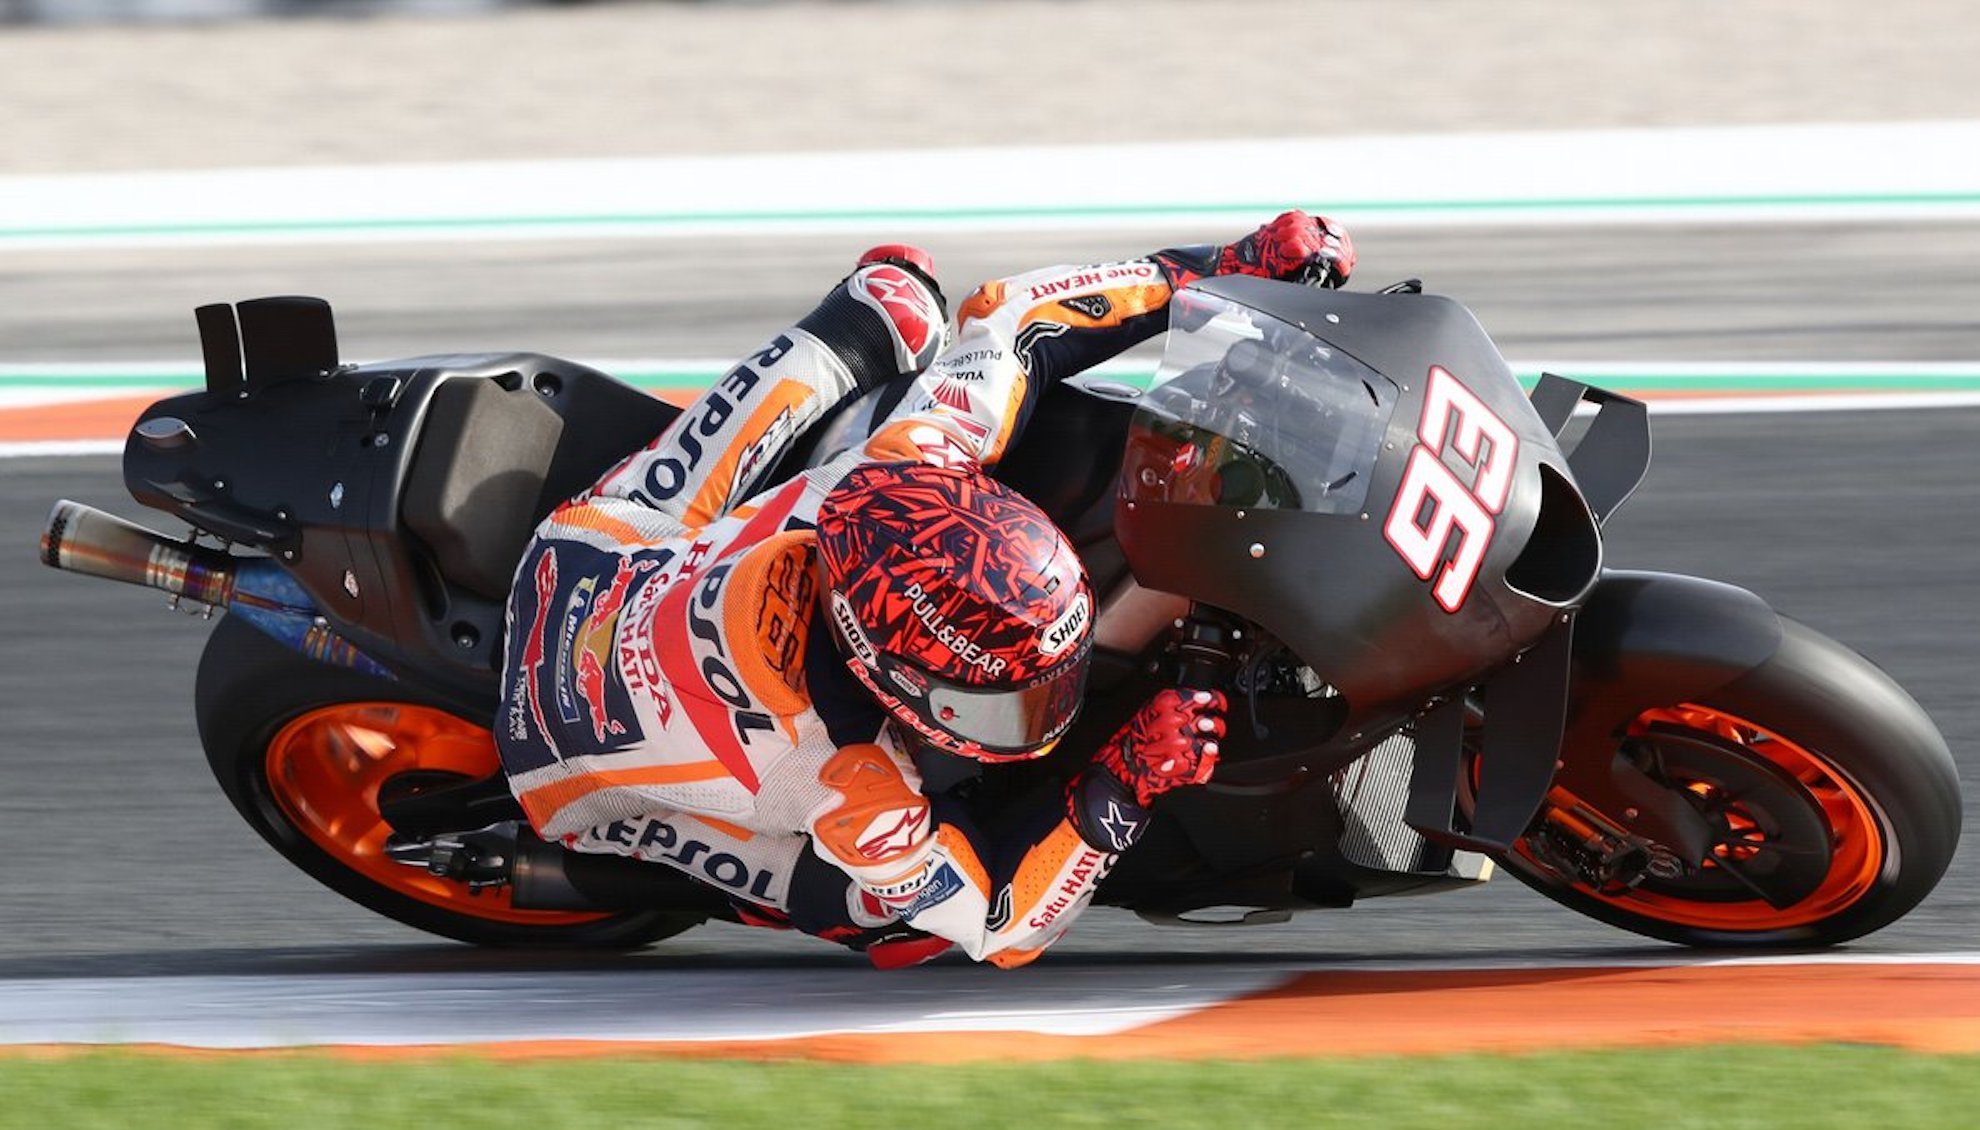 Marc Marquez on his machine of choice with HRC. Media sourced from Motorsports.